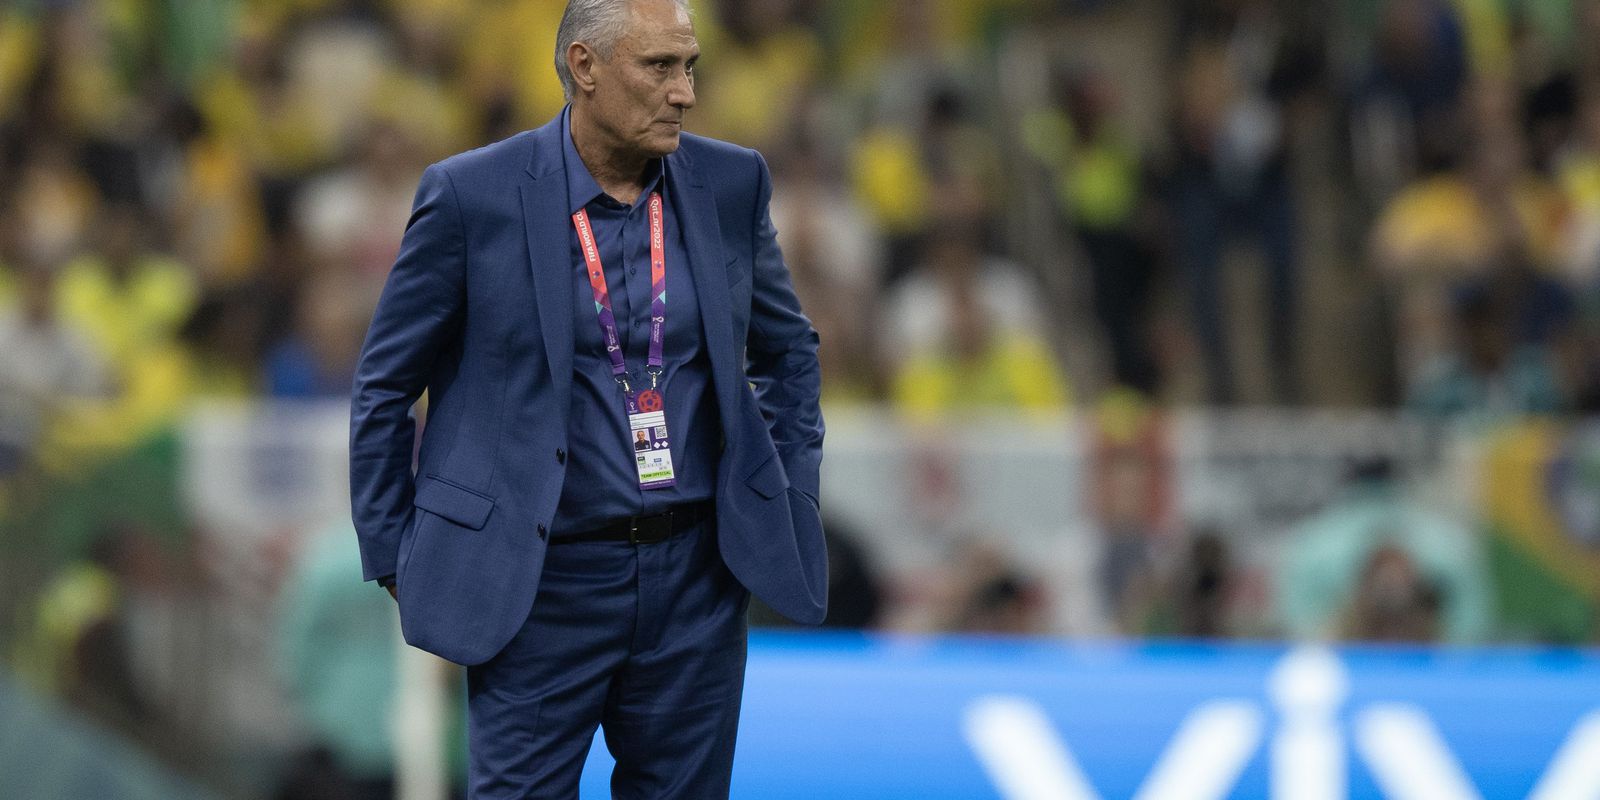 Brazil managed a convincing victory over Serbia, says Tite